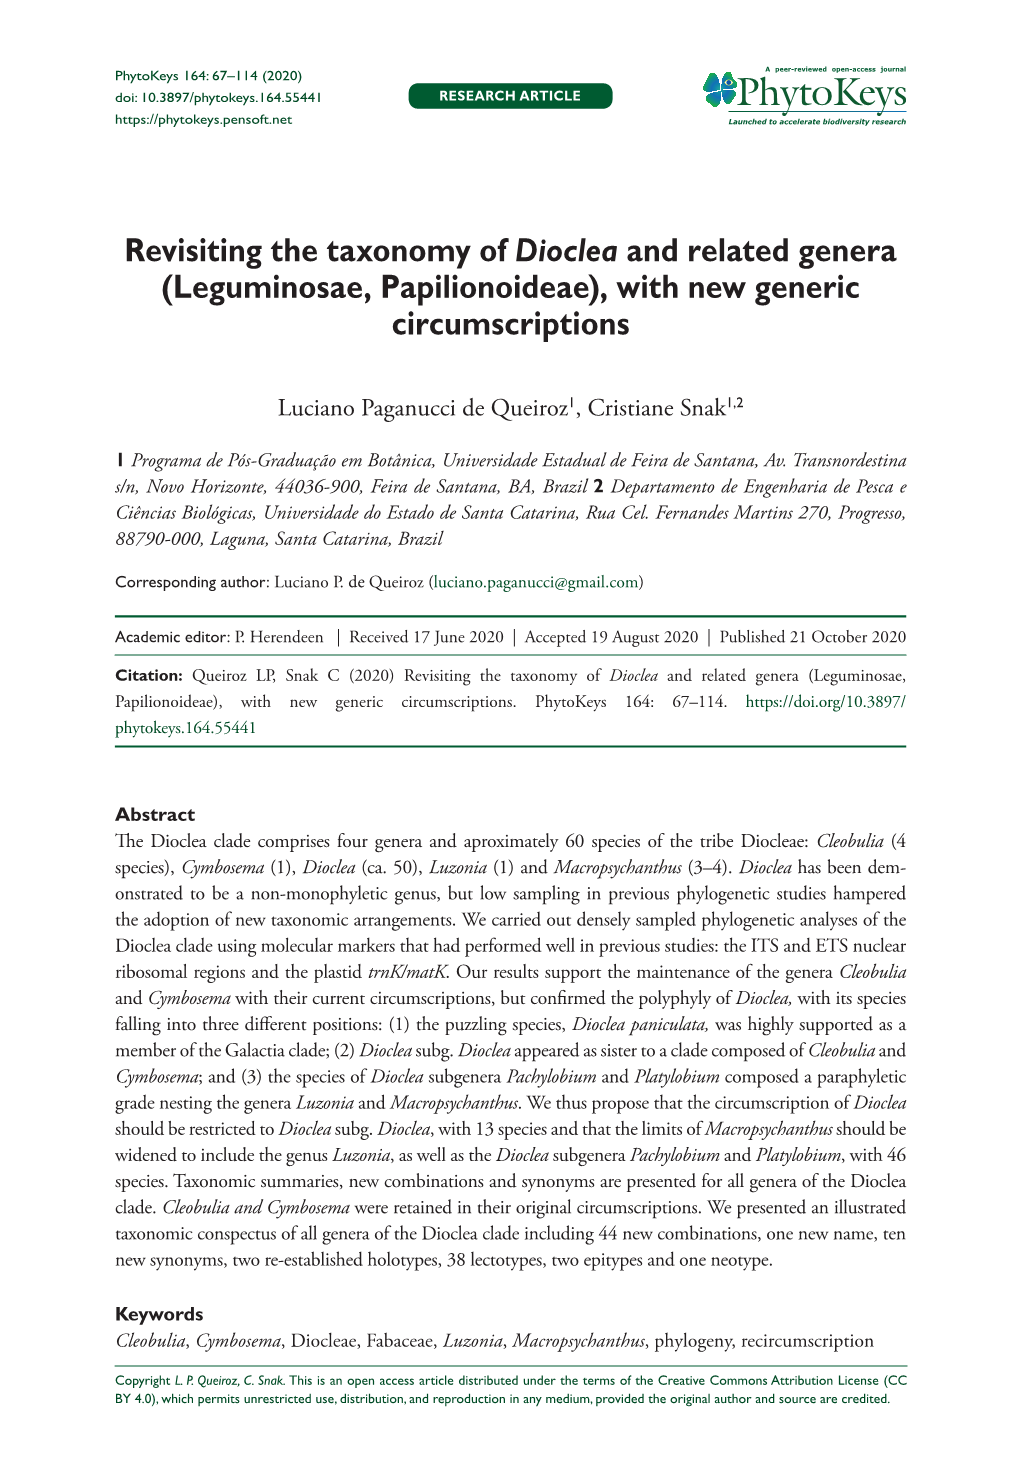 ﻿Revisiting the Taxonomy of Dioclea and Related Genera (Leguminosae